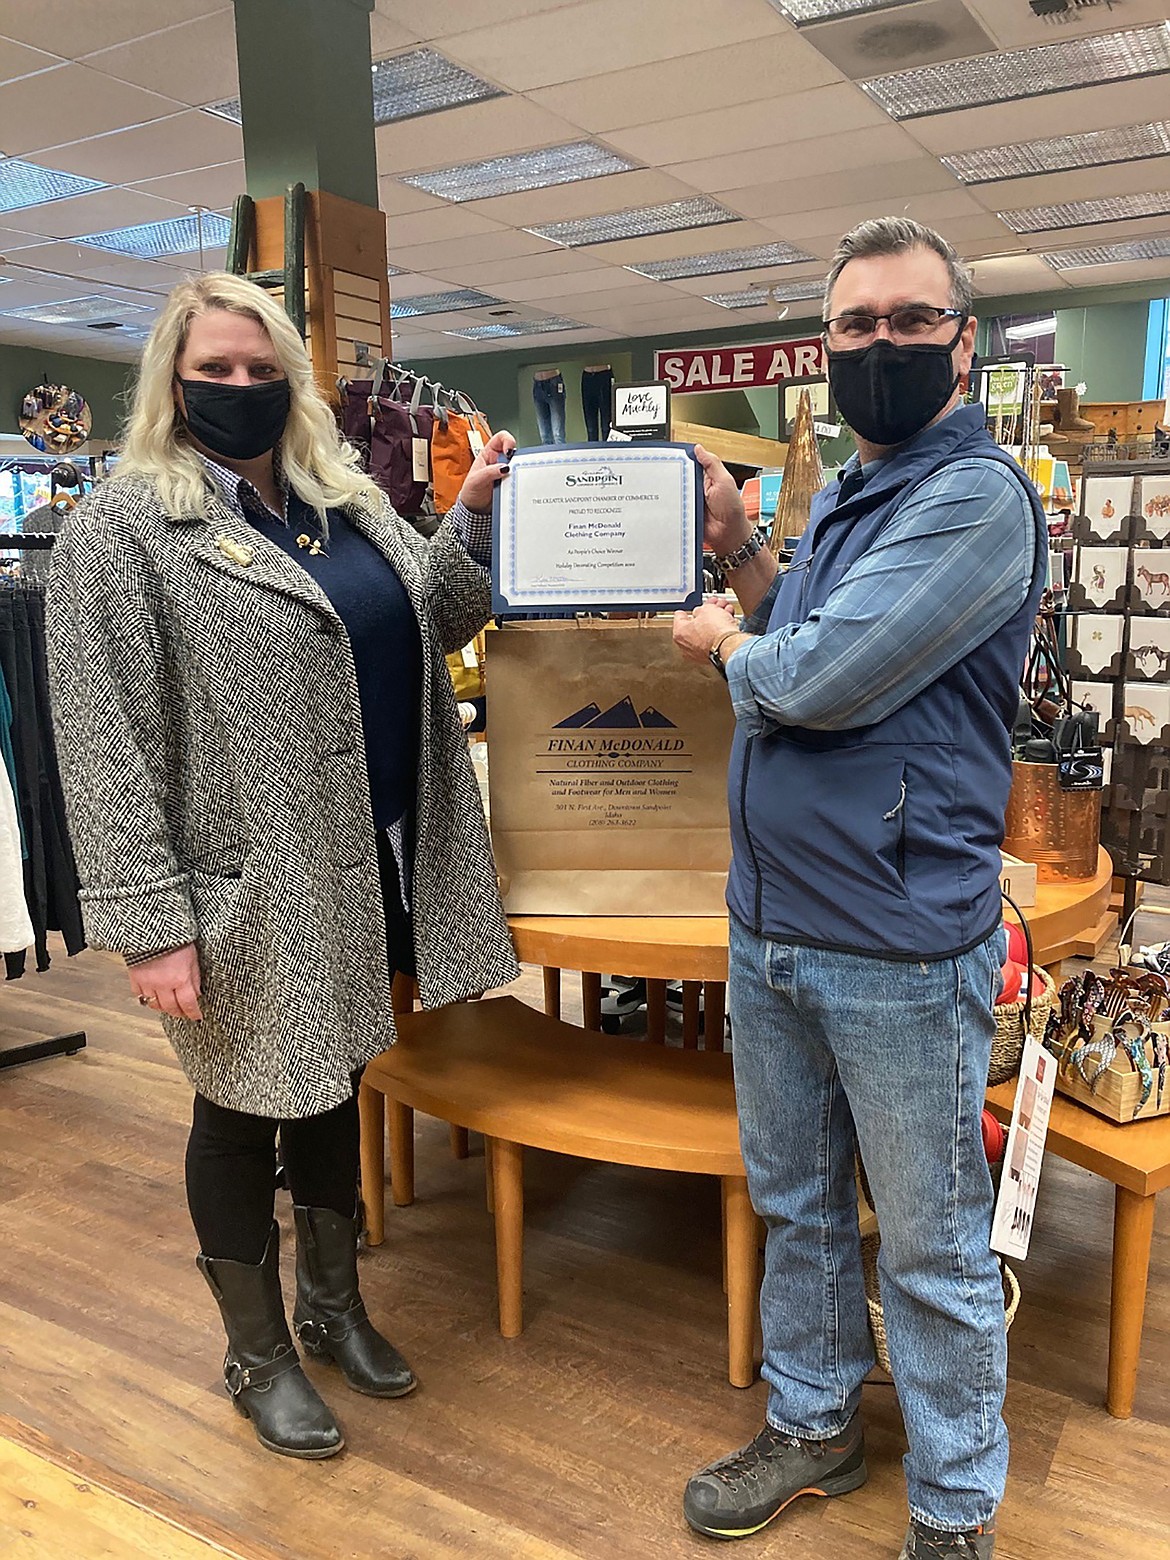 Greater Sandpoint Chamber of Commerce staffer Ricci Witte presents Finan McDonald with the 2020 People’s Choice certificate.